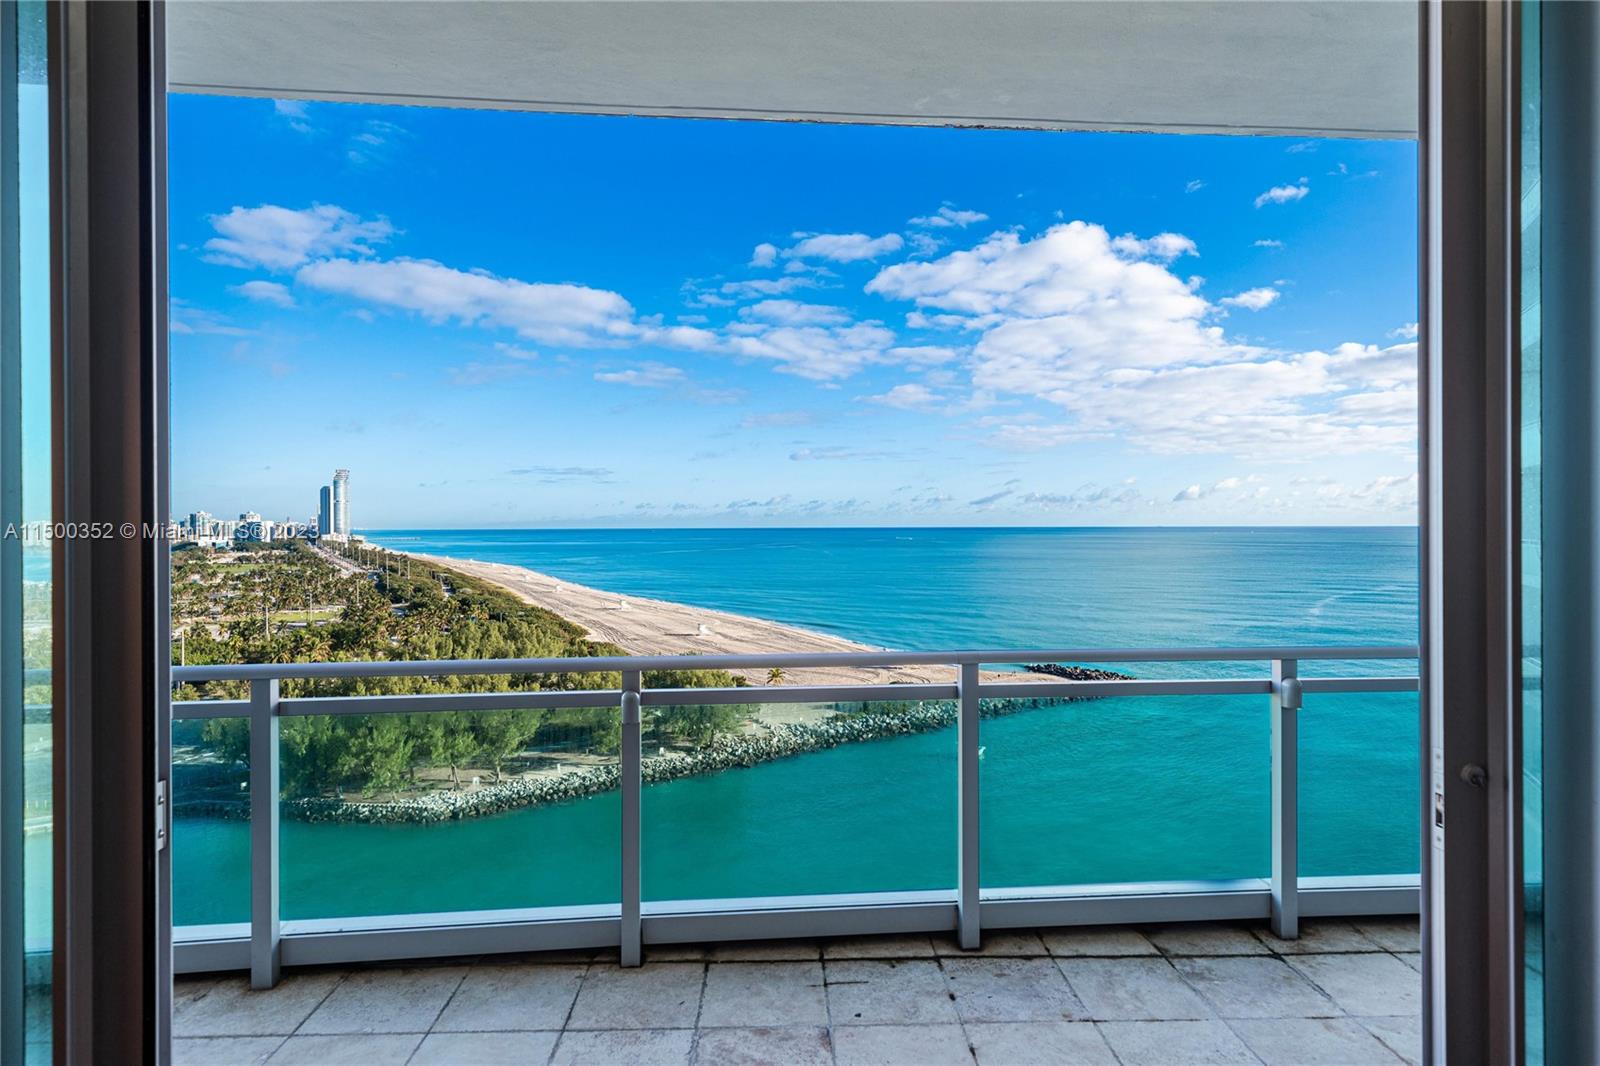 One Bal Harbour image #14